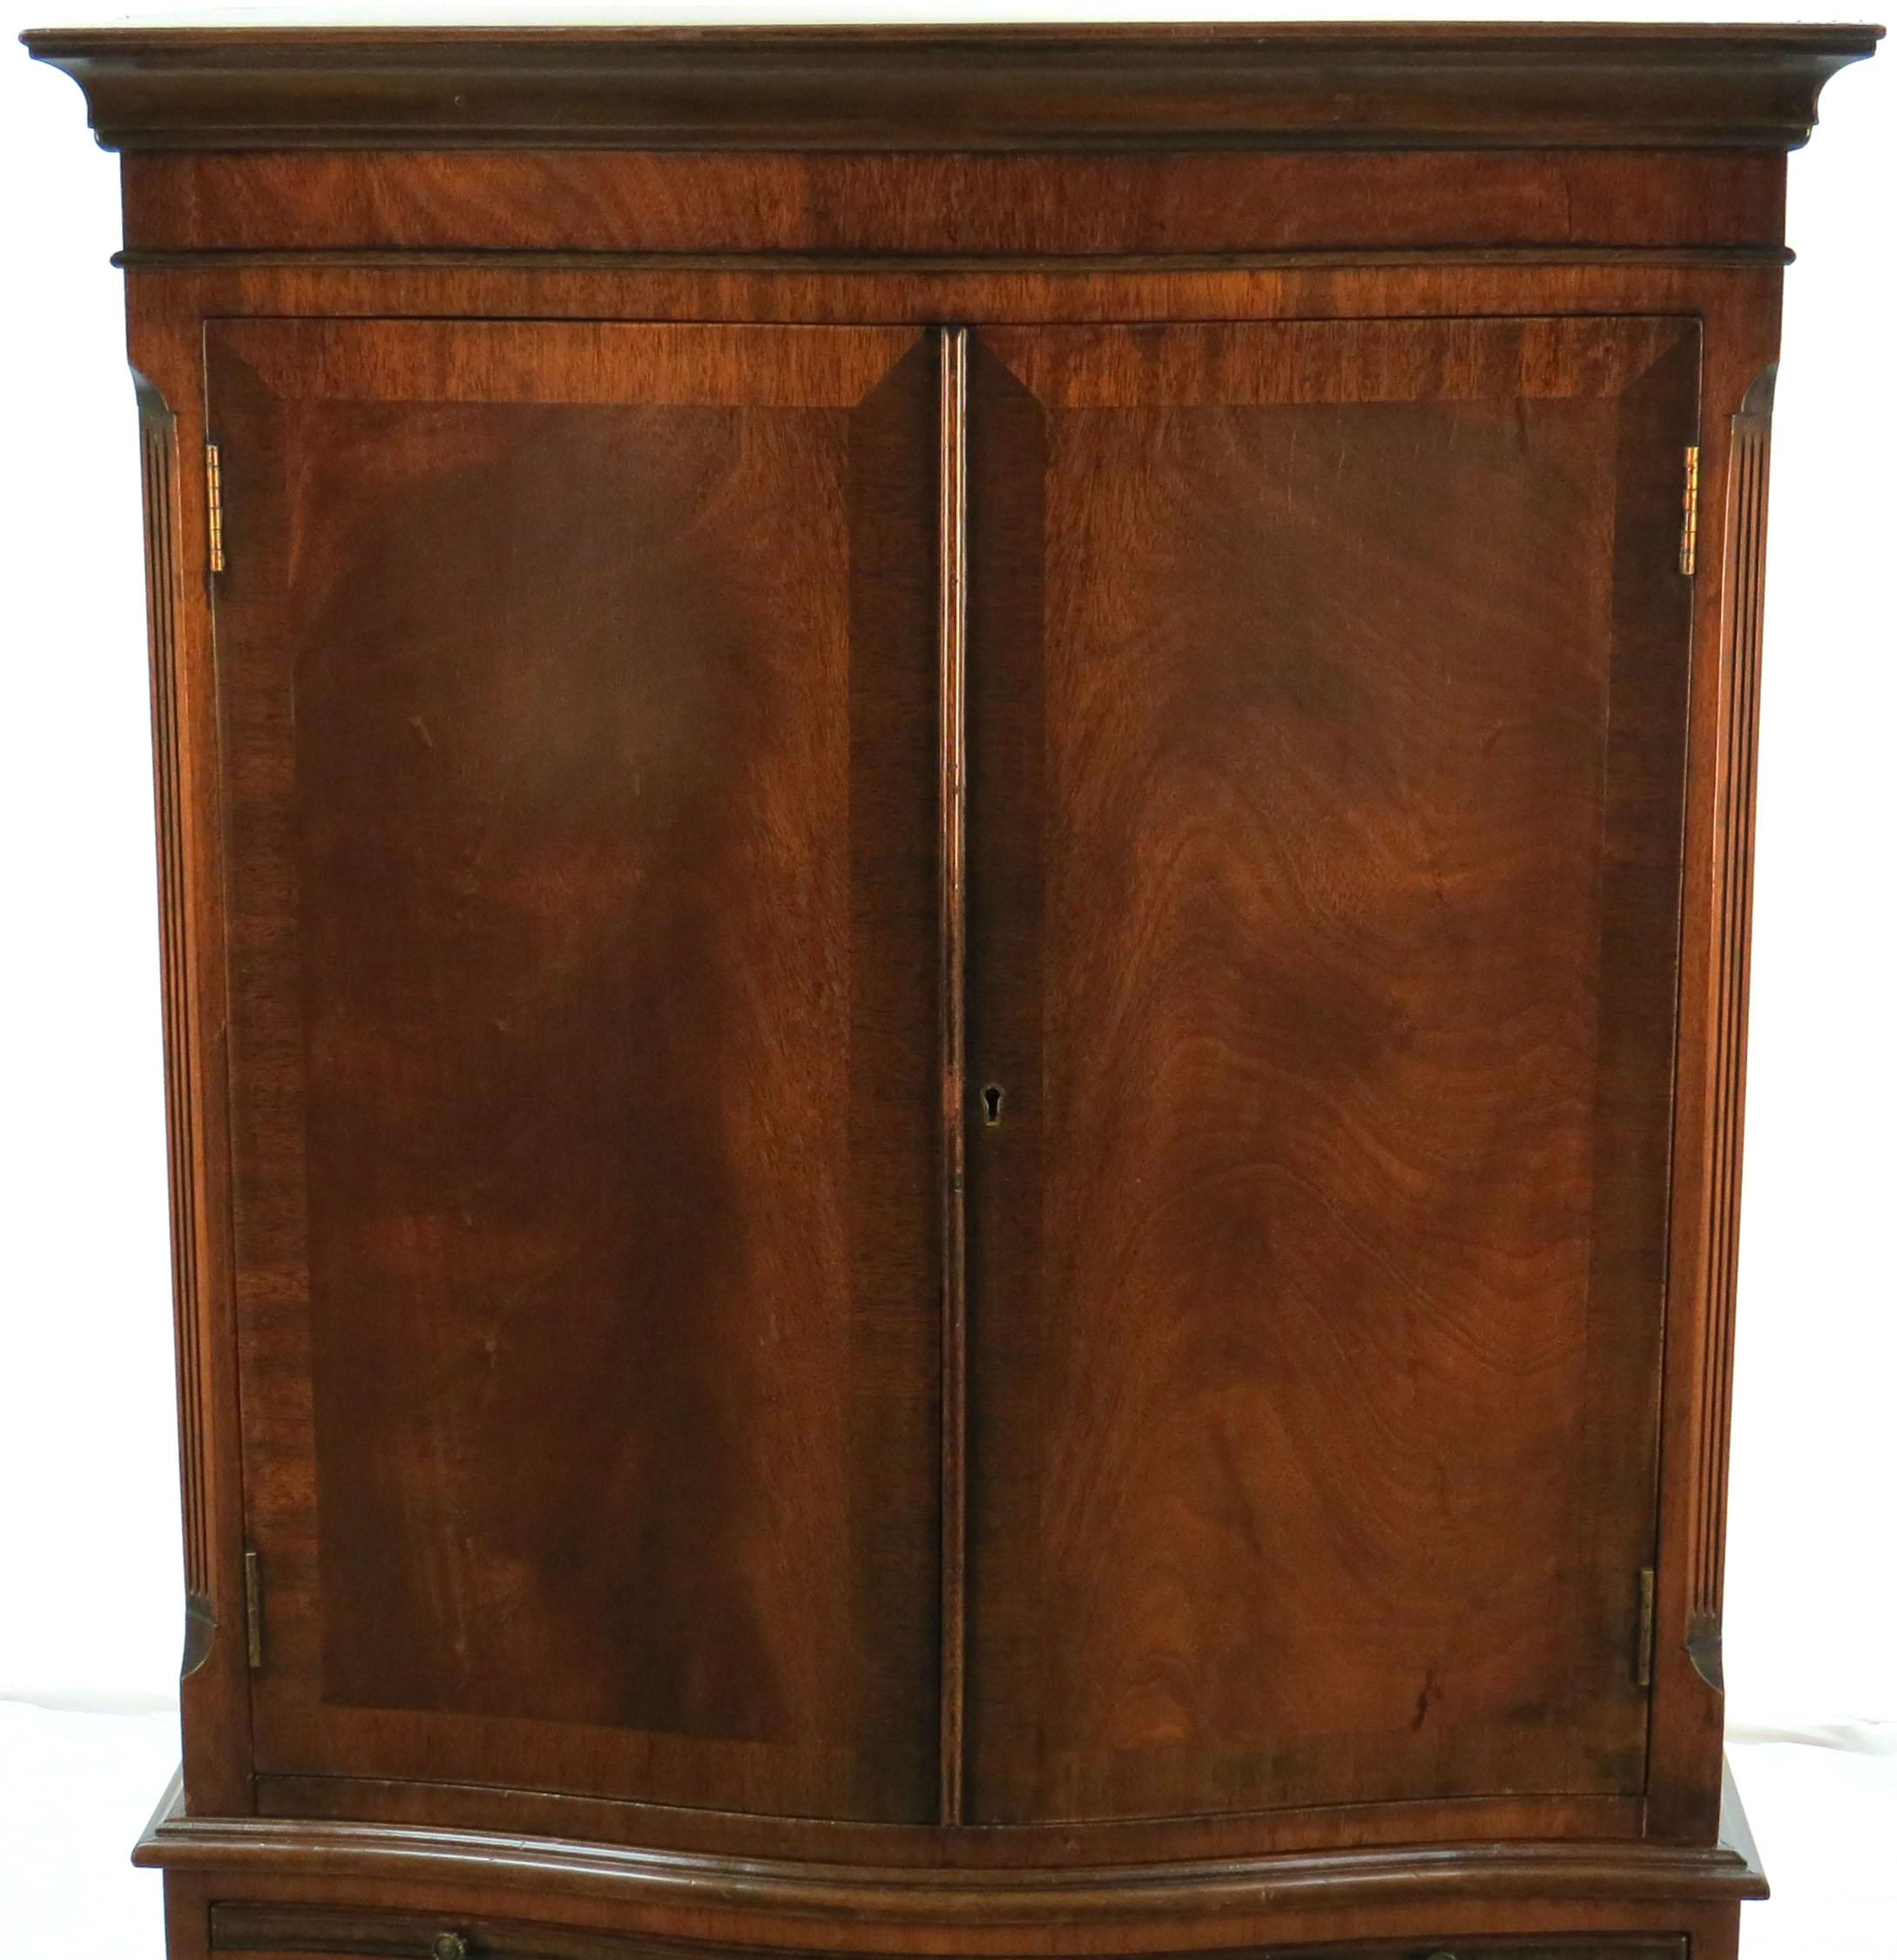 This amazing piece is a two section antique liquor cabinet from England. It was crafted there sometime around the year 1960. From parties to just an evening drink, this bar will serve you and your family in style for many years to come!

The wood